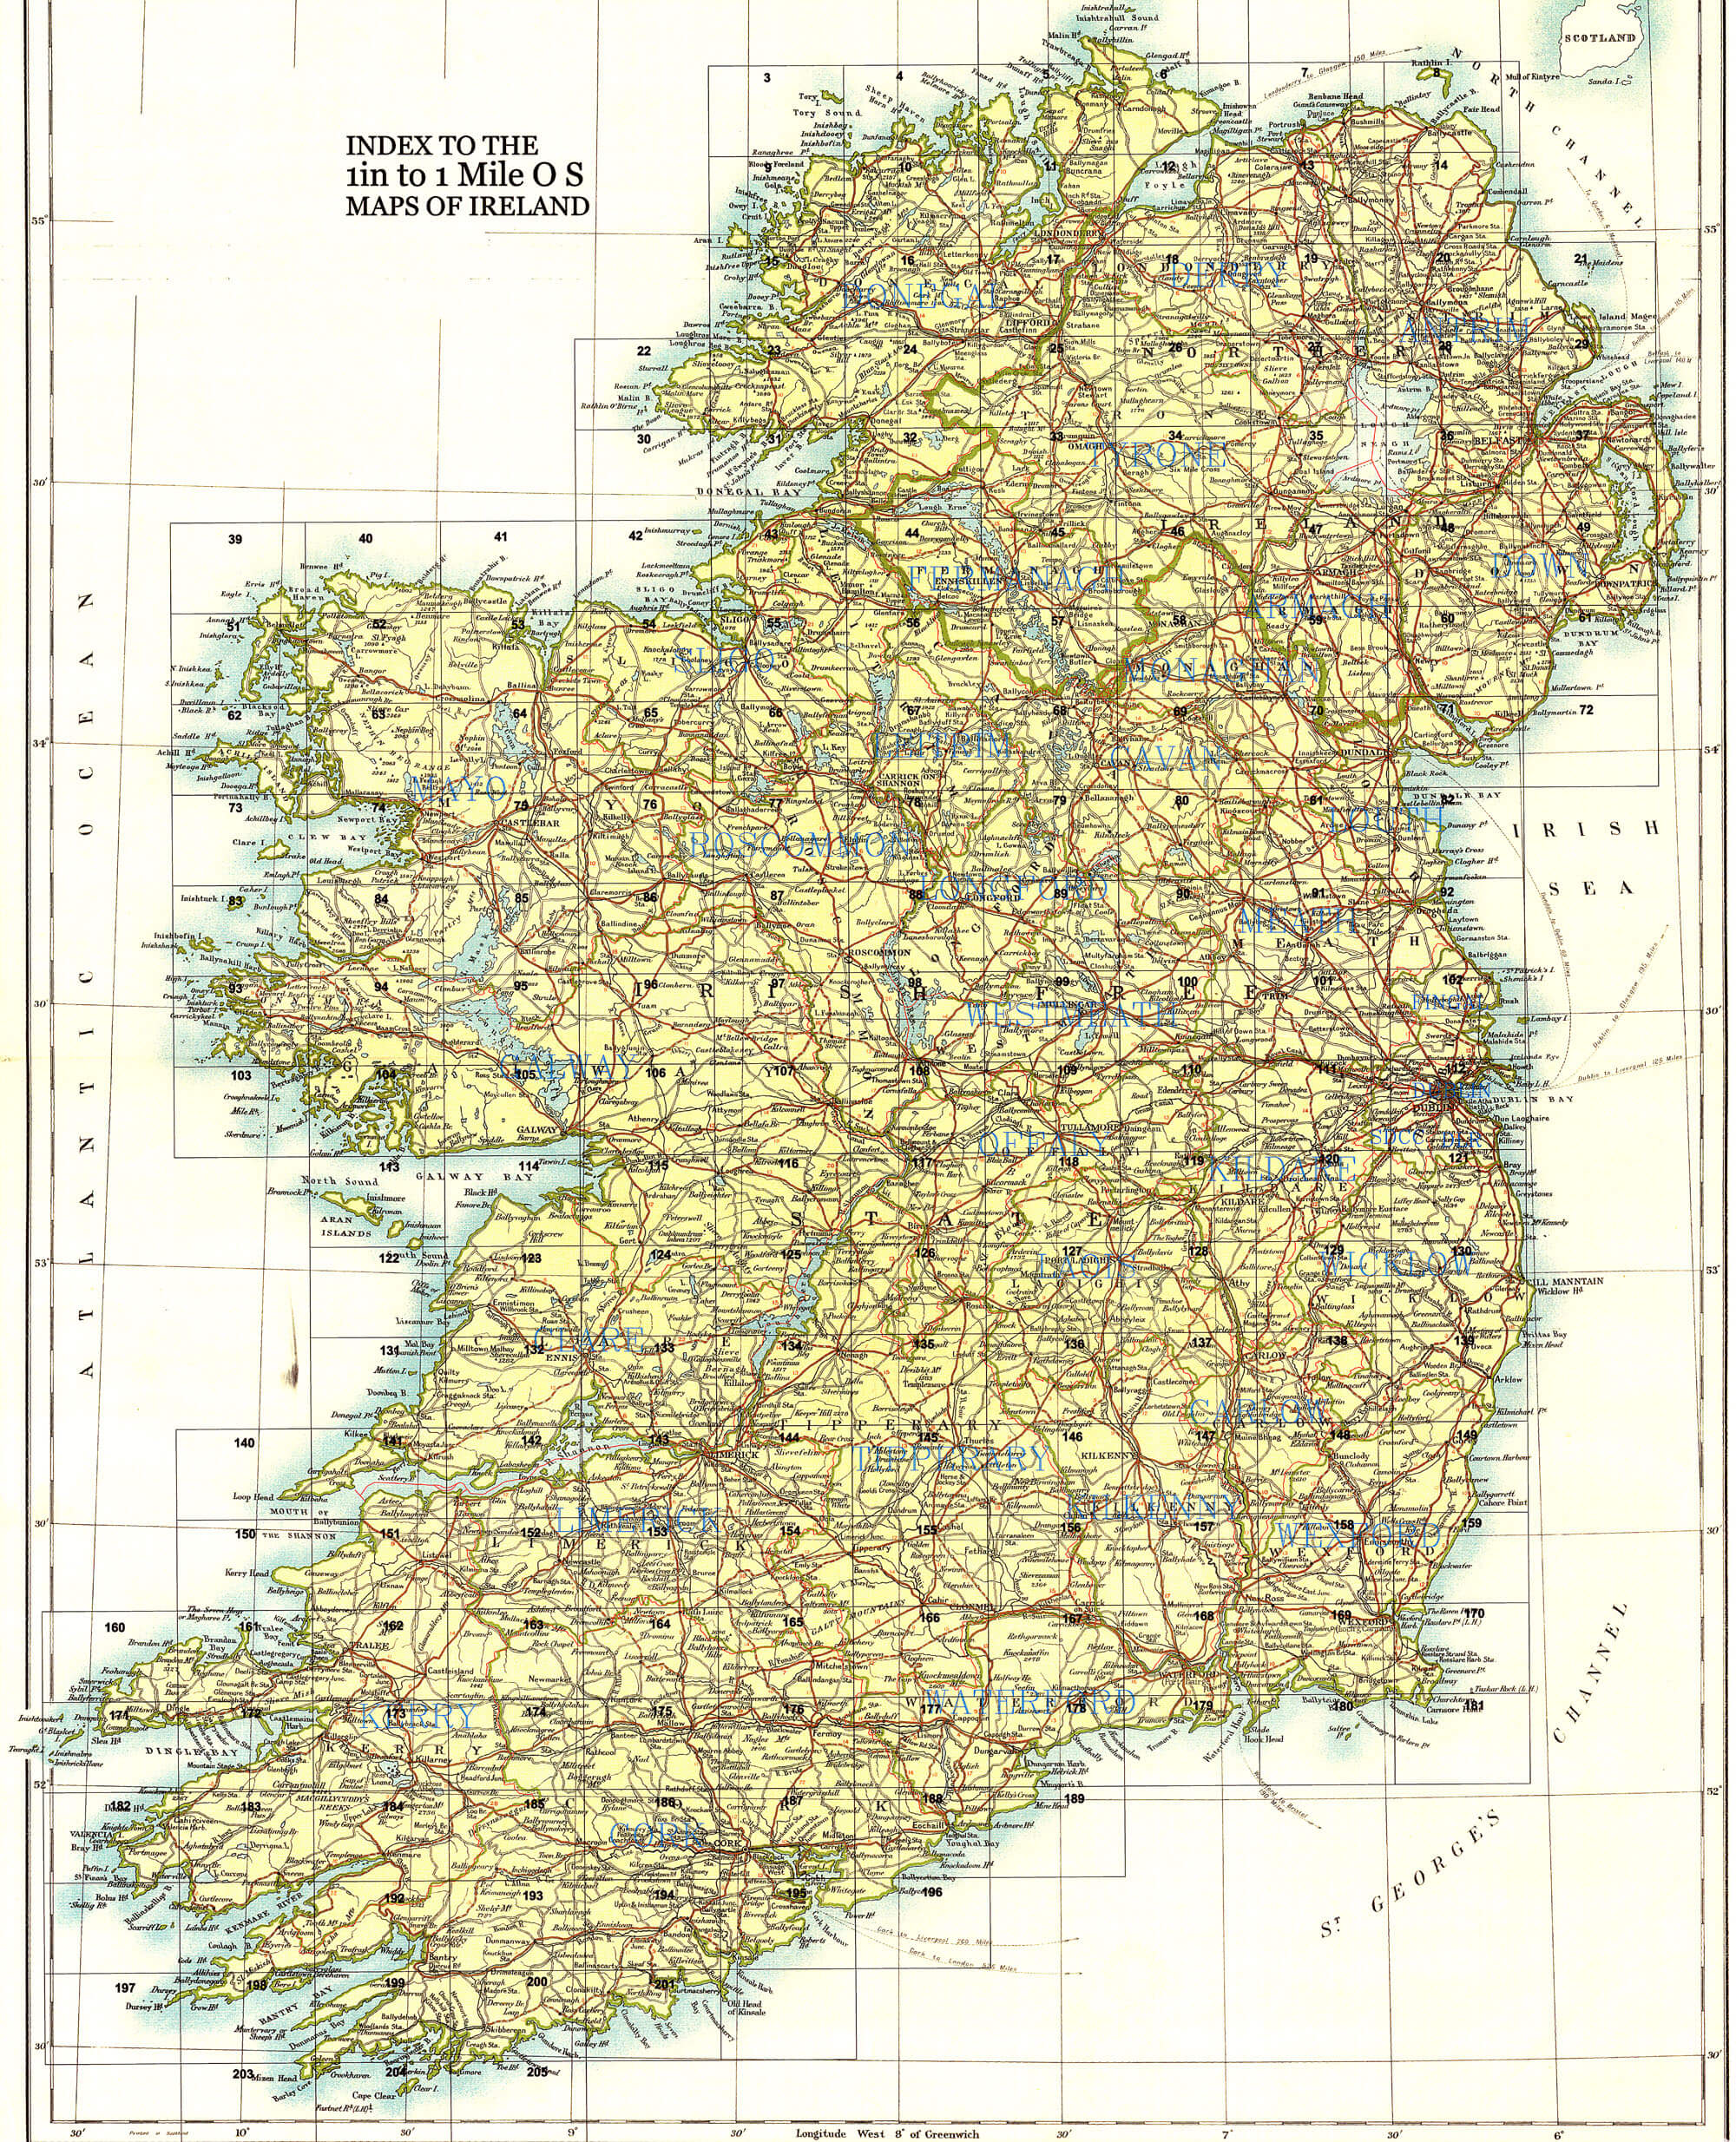 Ireland 1in to one mile Topographic Geological 1859-1890 Part 4 Sheets ...